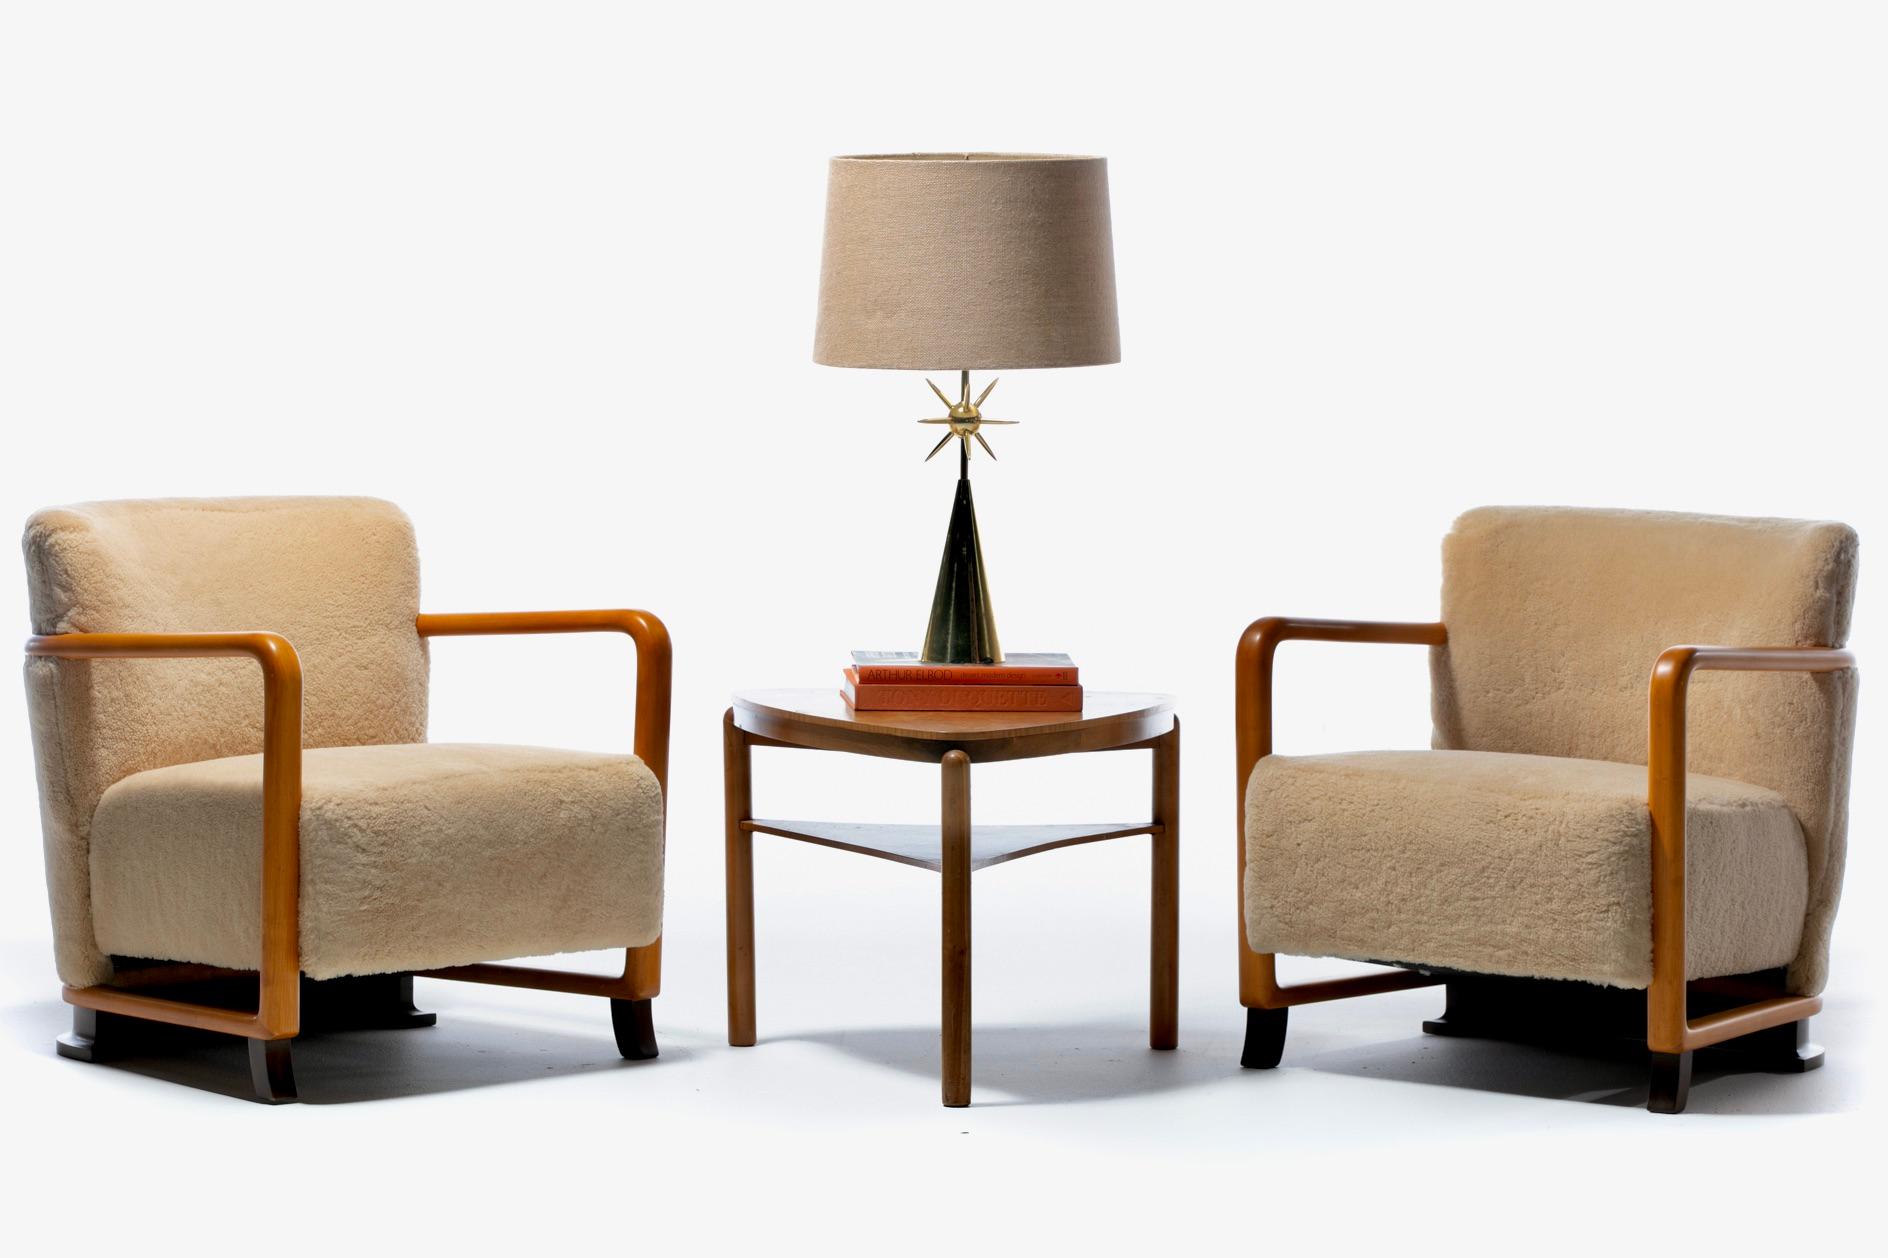 Elegant and luxurious pair of 1930s Bentwood Lounge armchairs newly professionally upholstered in hand sewn cream Palomino Shearling hides in the style of Gilbert Rohde. Streamlined Moderne Art Deco chairs with artisan handmade bentwood arms and a